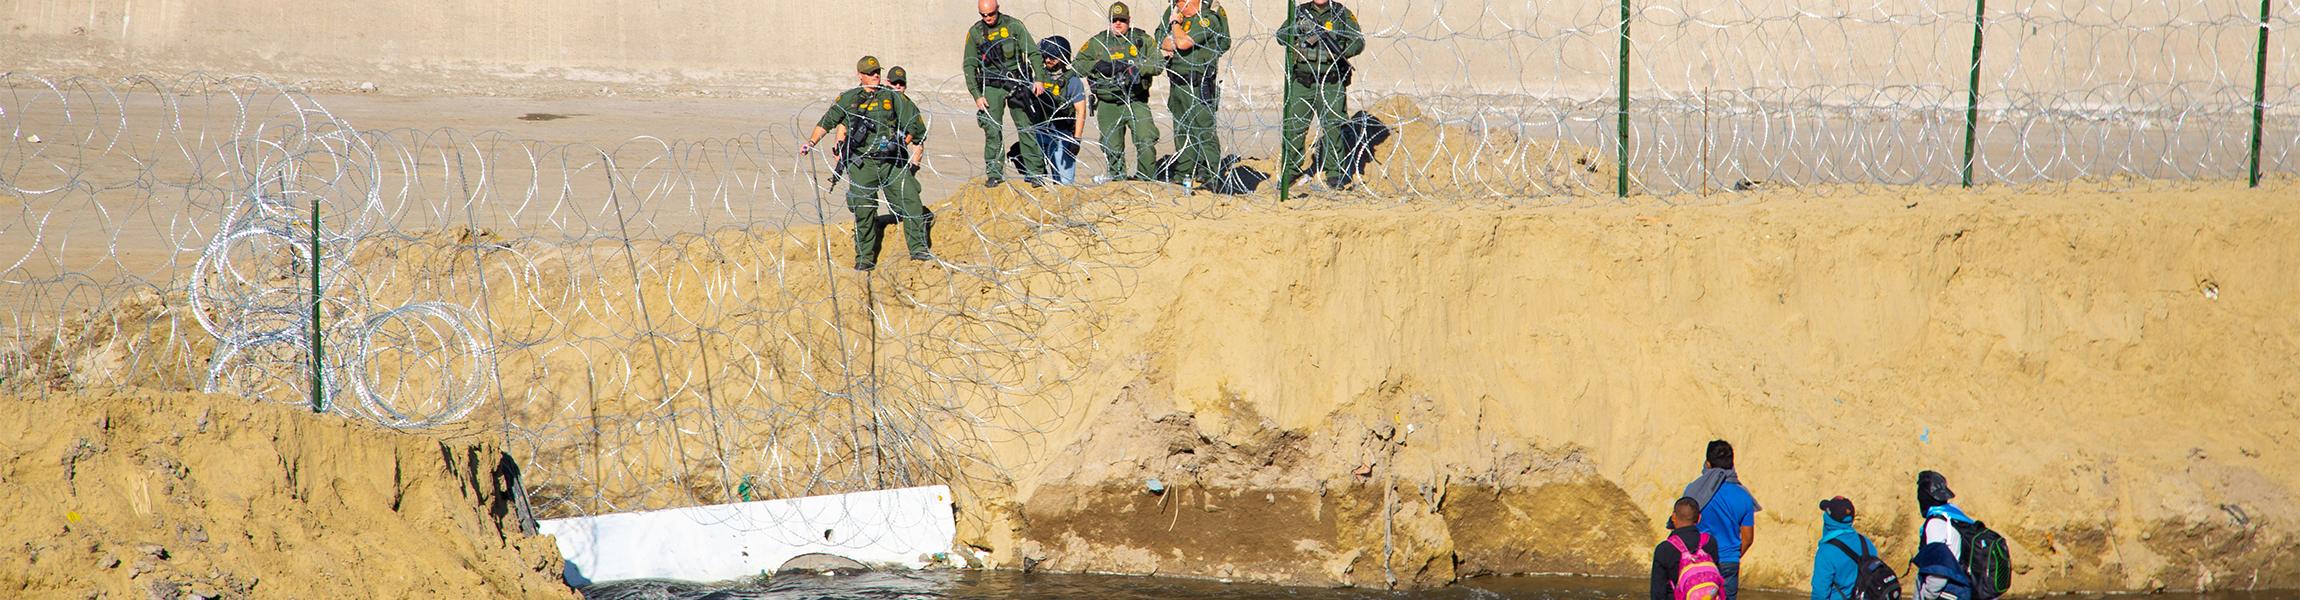 A group of migrants looks up at a barbed-wire fence and border police